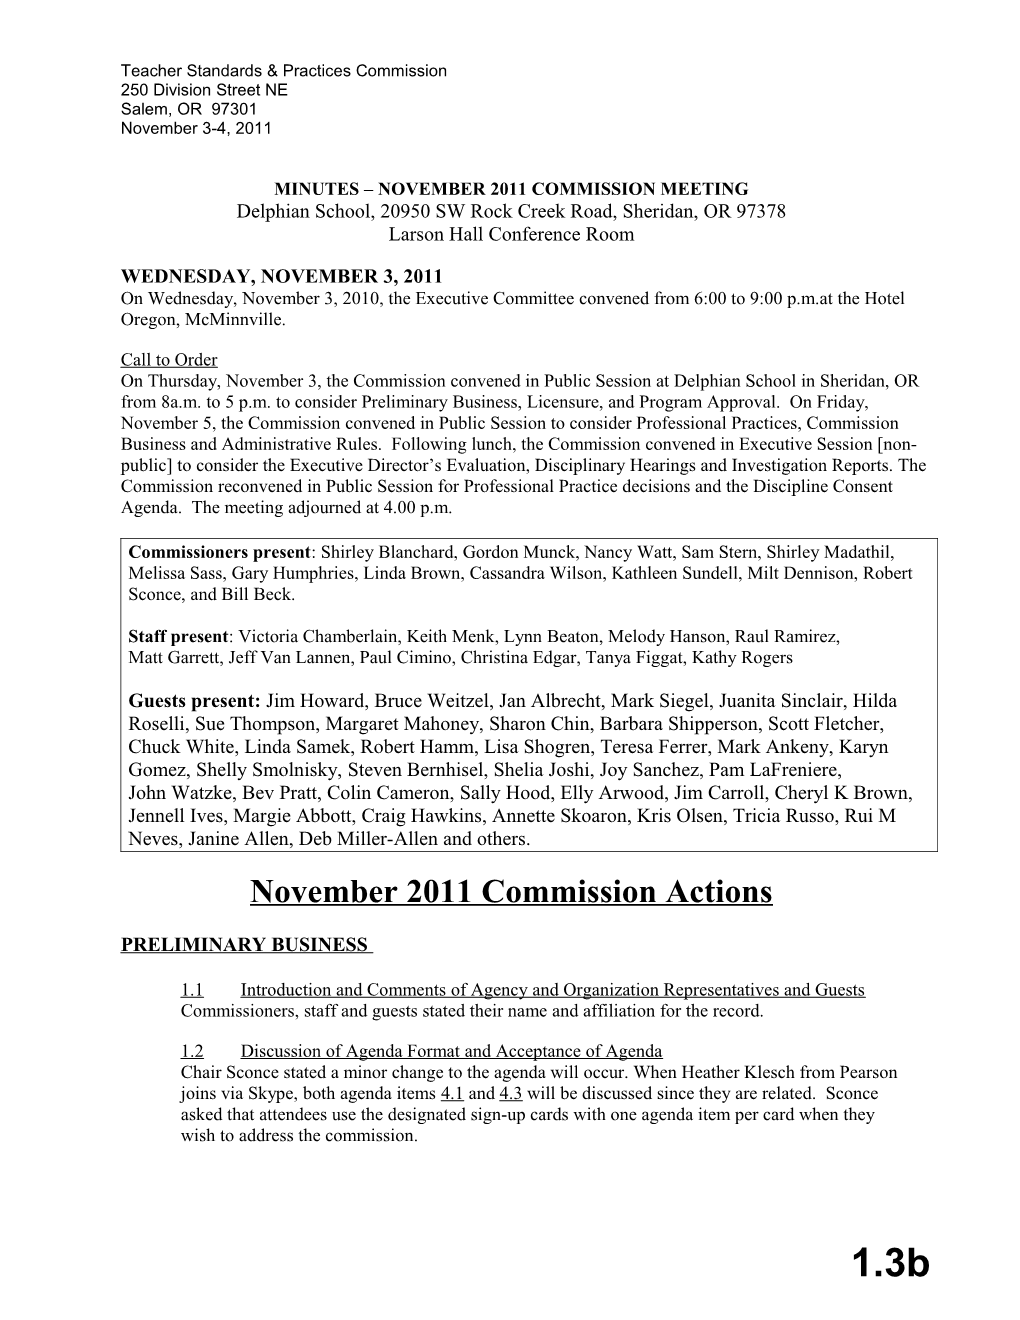 Teacher Standards and Practices Commission s3